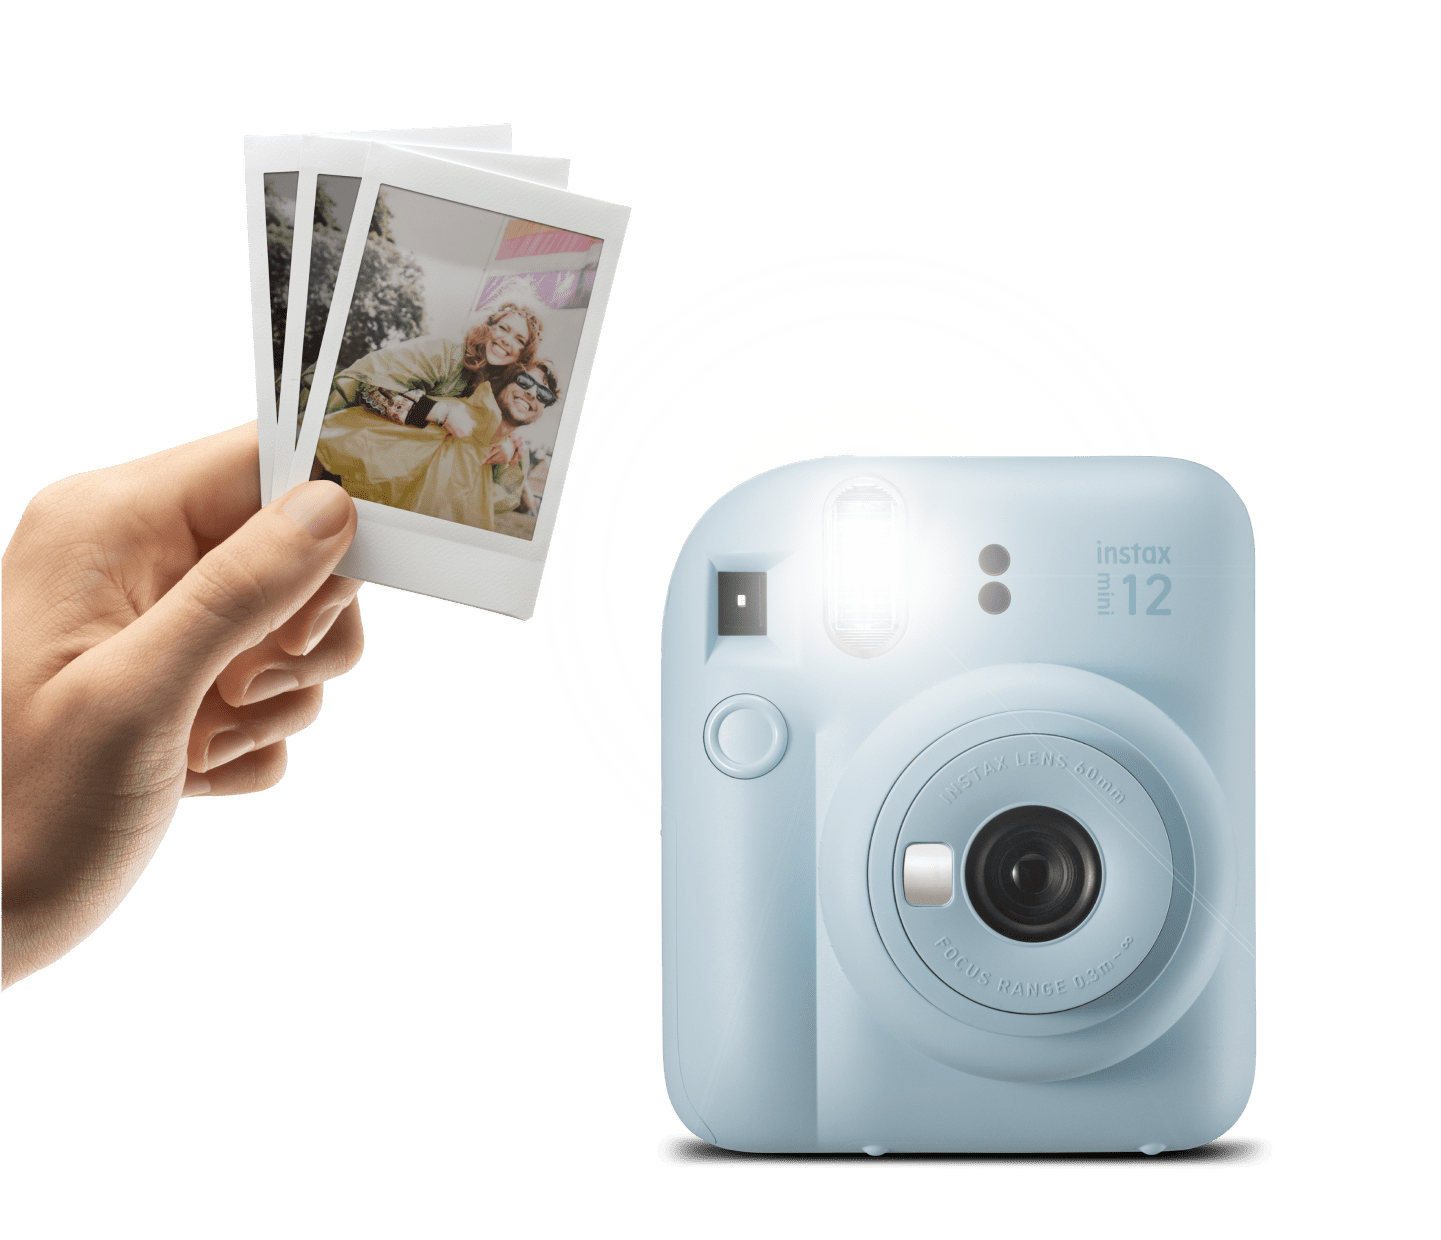 INSTAX mini 12 Specifications